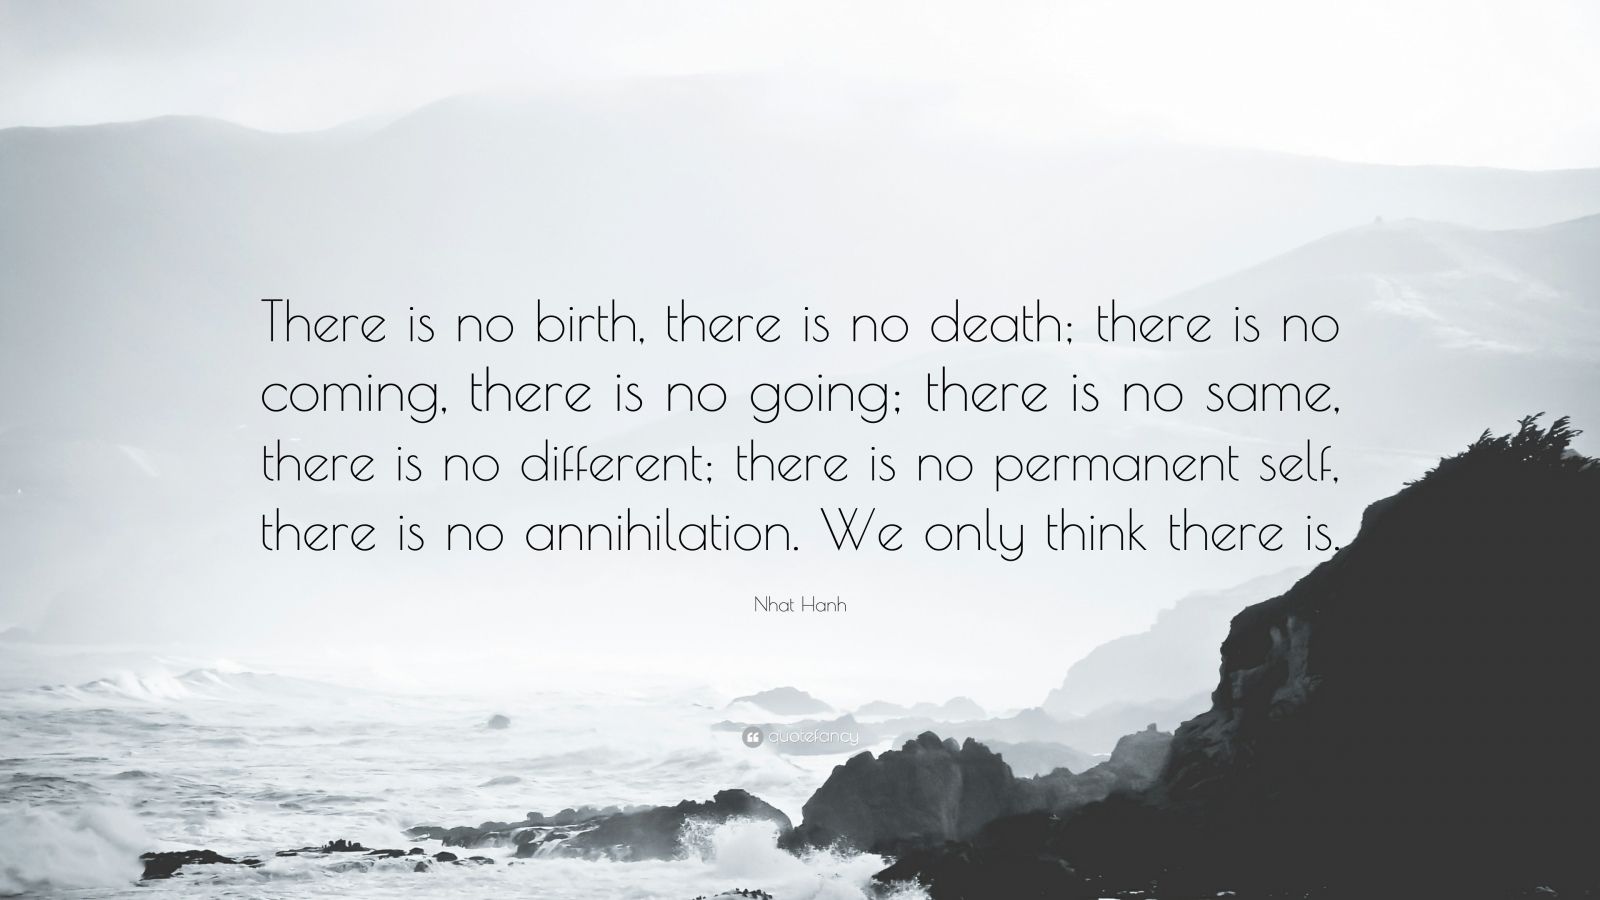 Nhat Hanh Quote “There is no birth there is no there